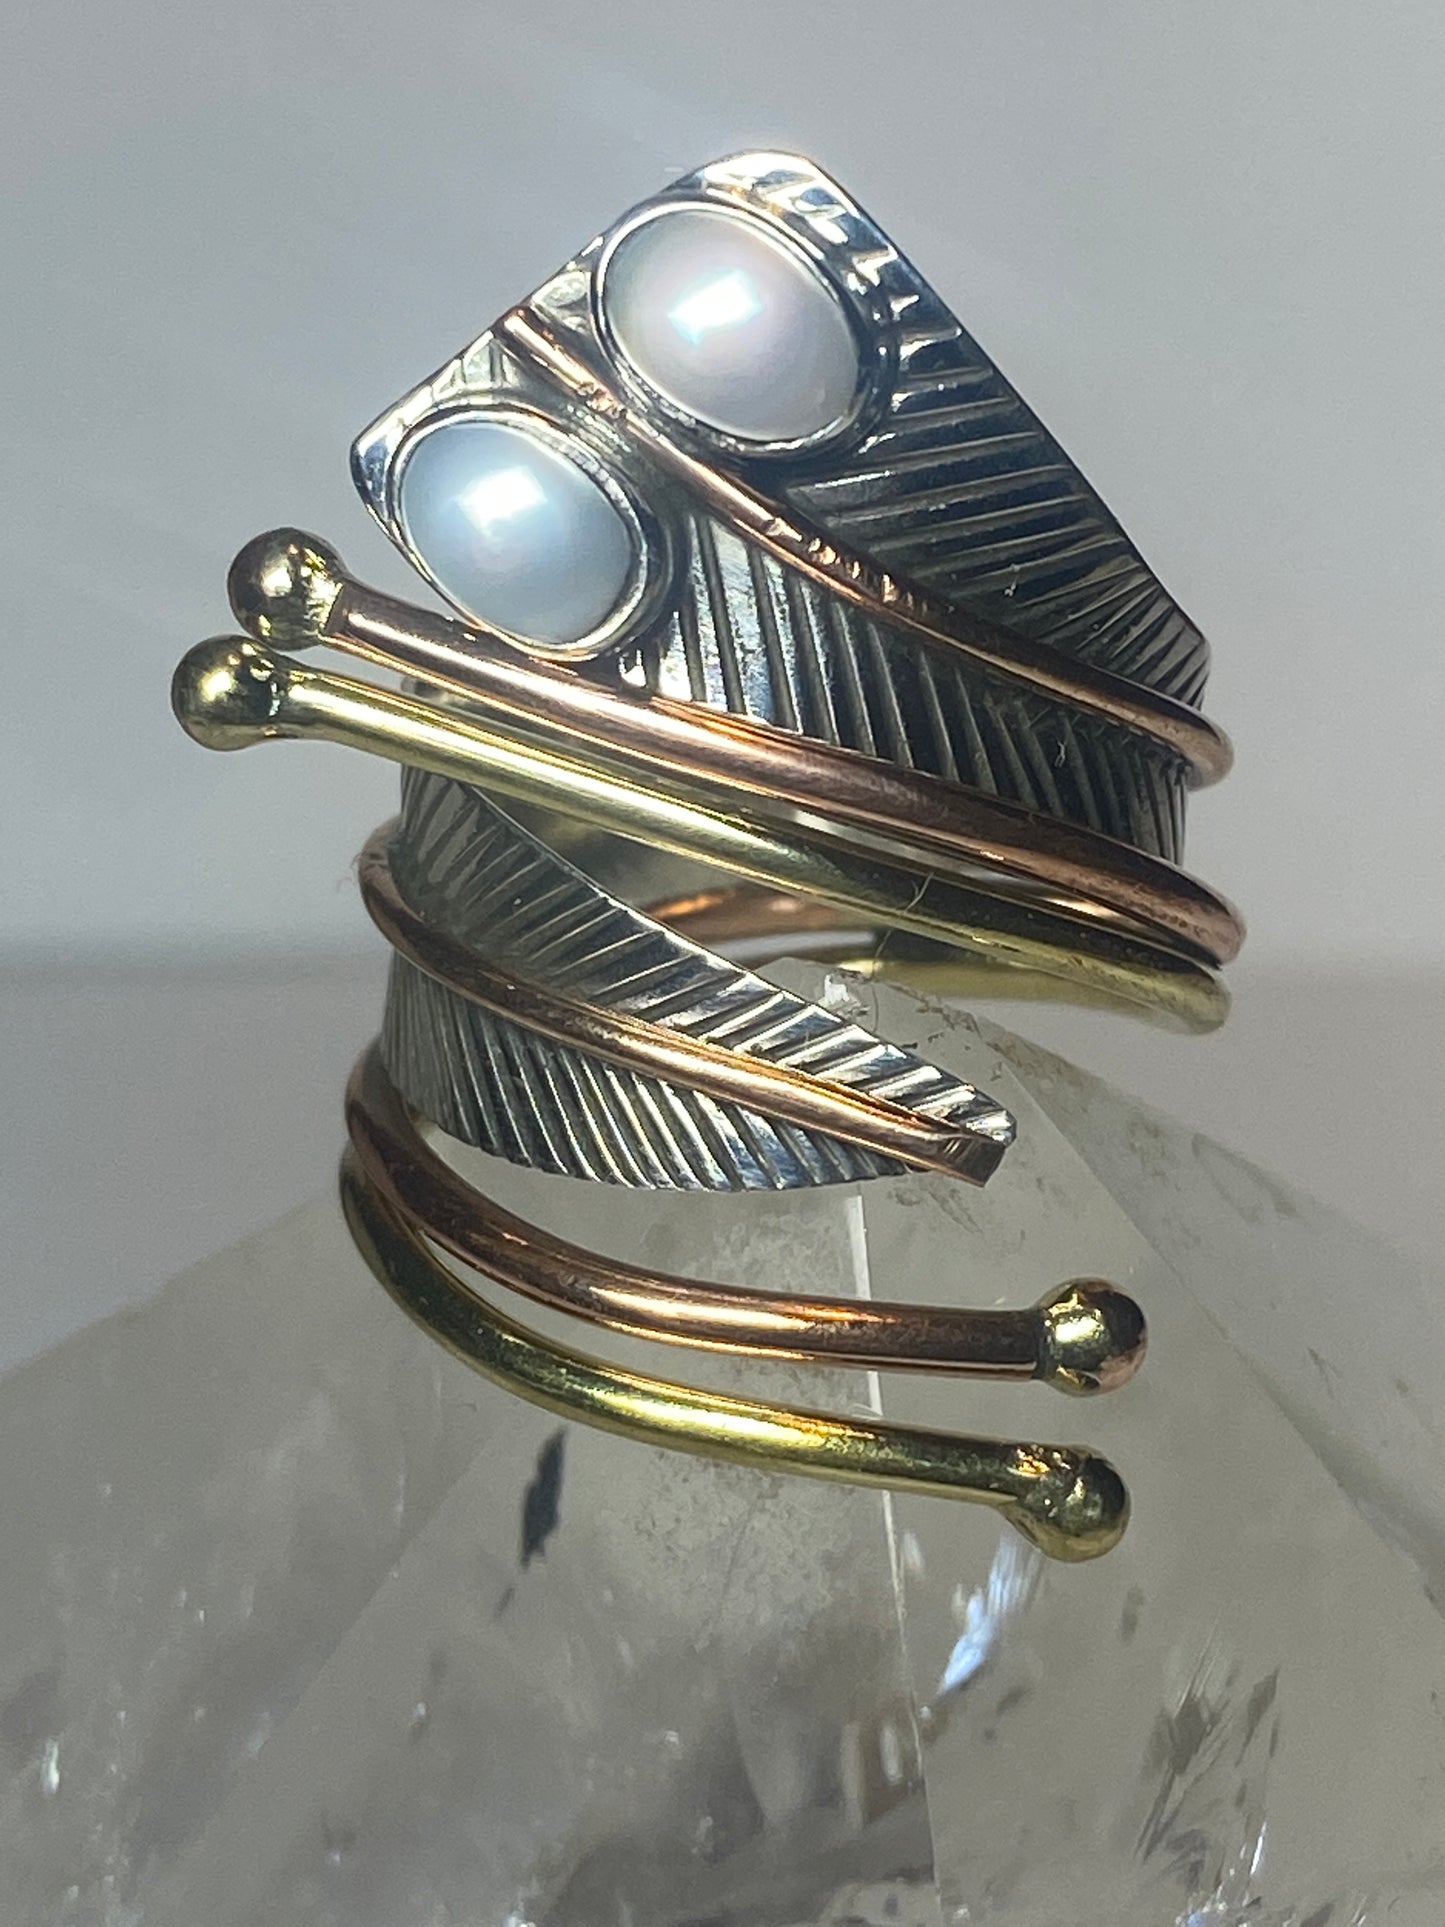 Pearl wrap around ring leaf band sterling silver women girls